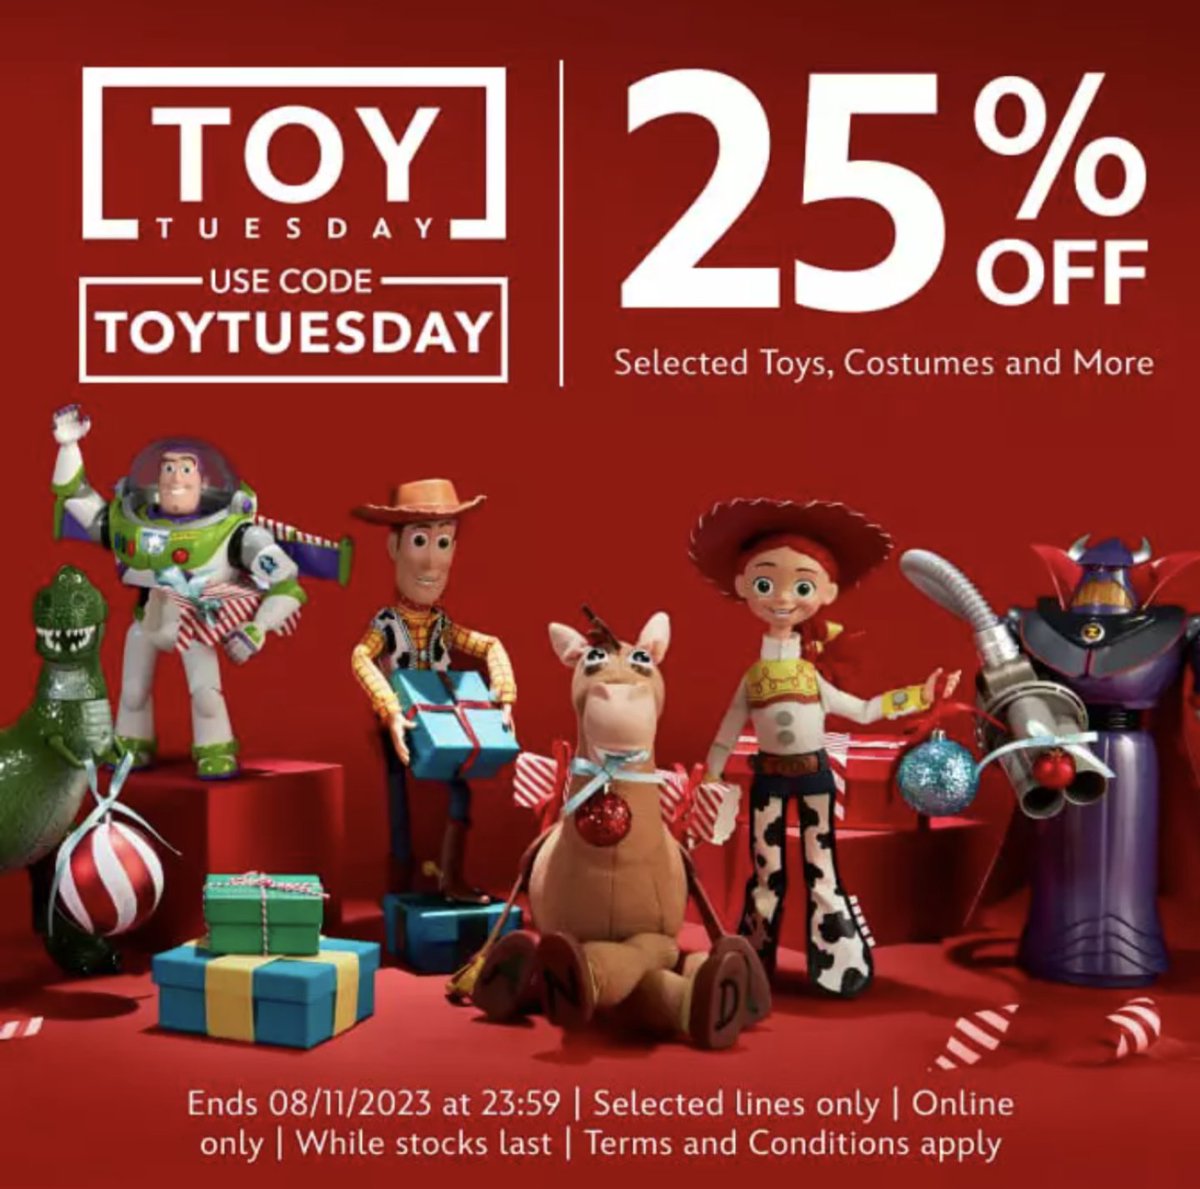 Head to the Disney store to get 25% off only for today 😀 katesearresistibles.etsy.com #disney #disneyadult #25off #christmas #disneychristmas #holidaysarecoming